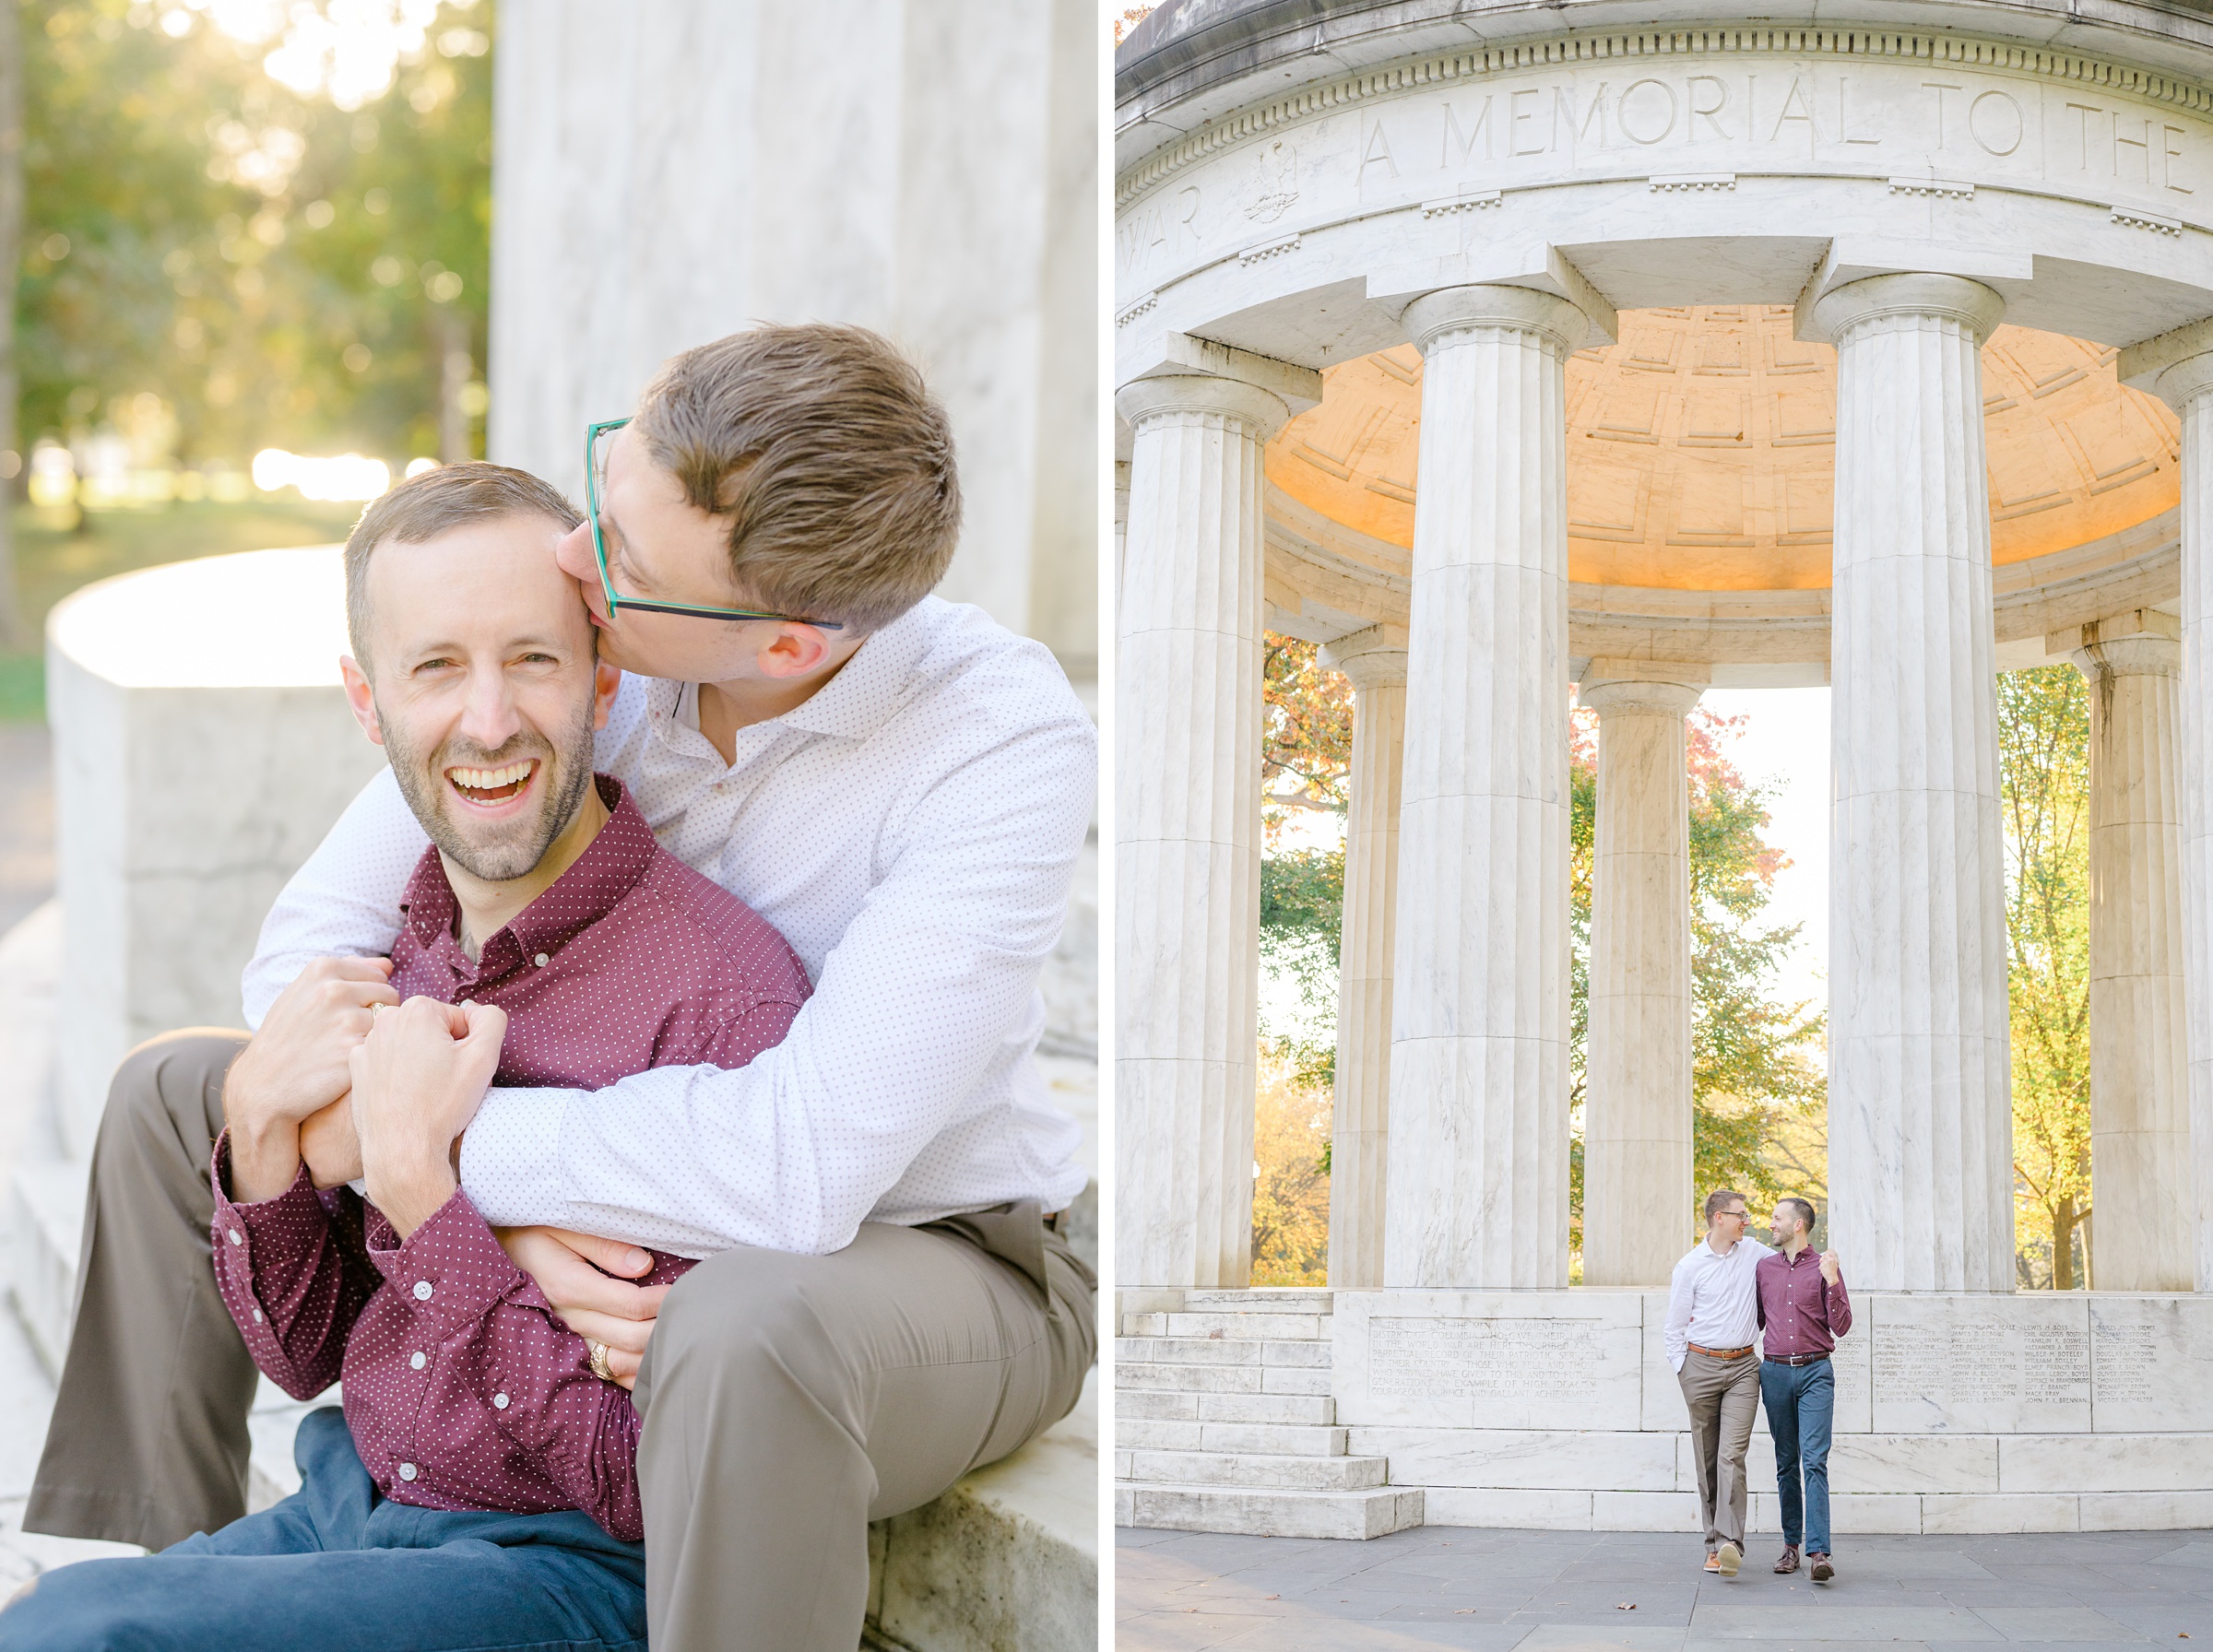 Engagement Photos on the National Mall in Washington, D.C. photographed by Baltimore Wedding Photographer Cait Kramer.